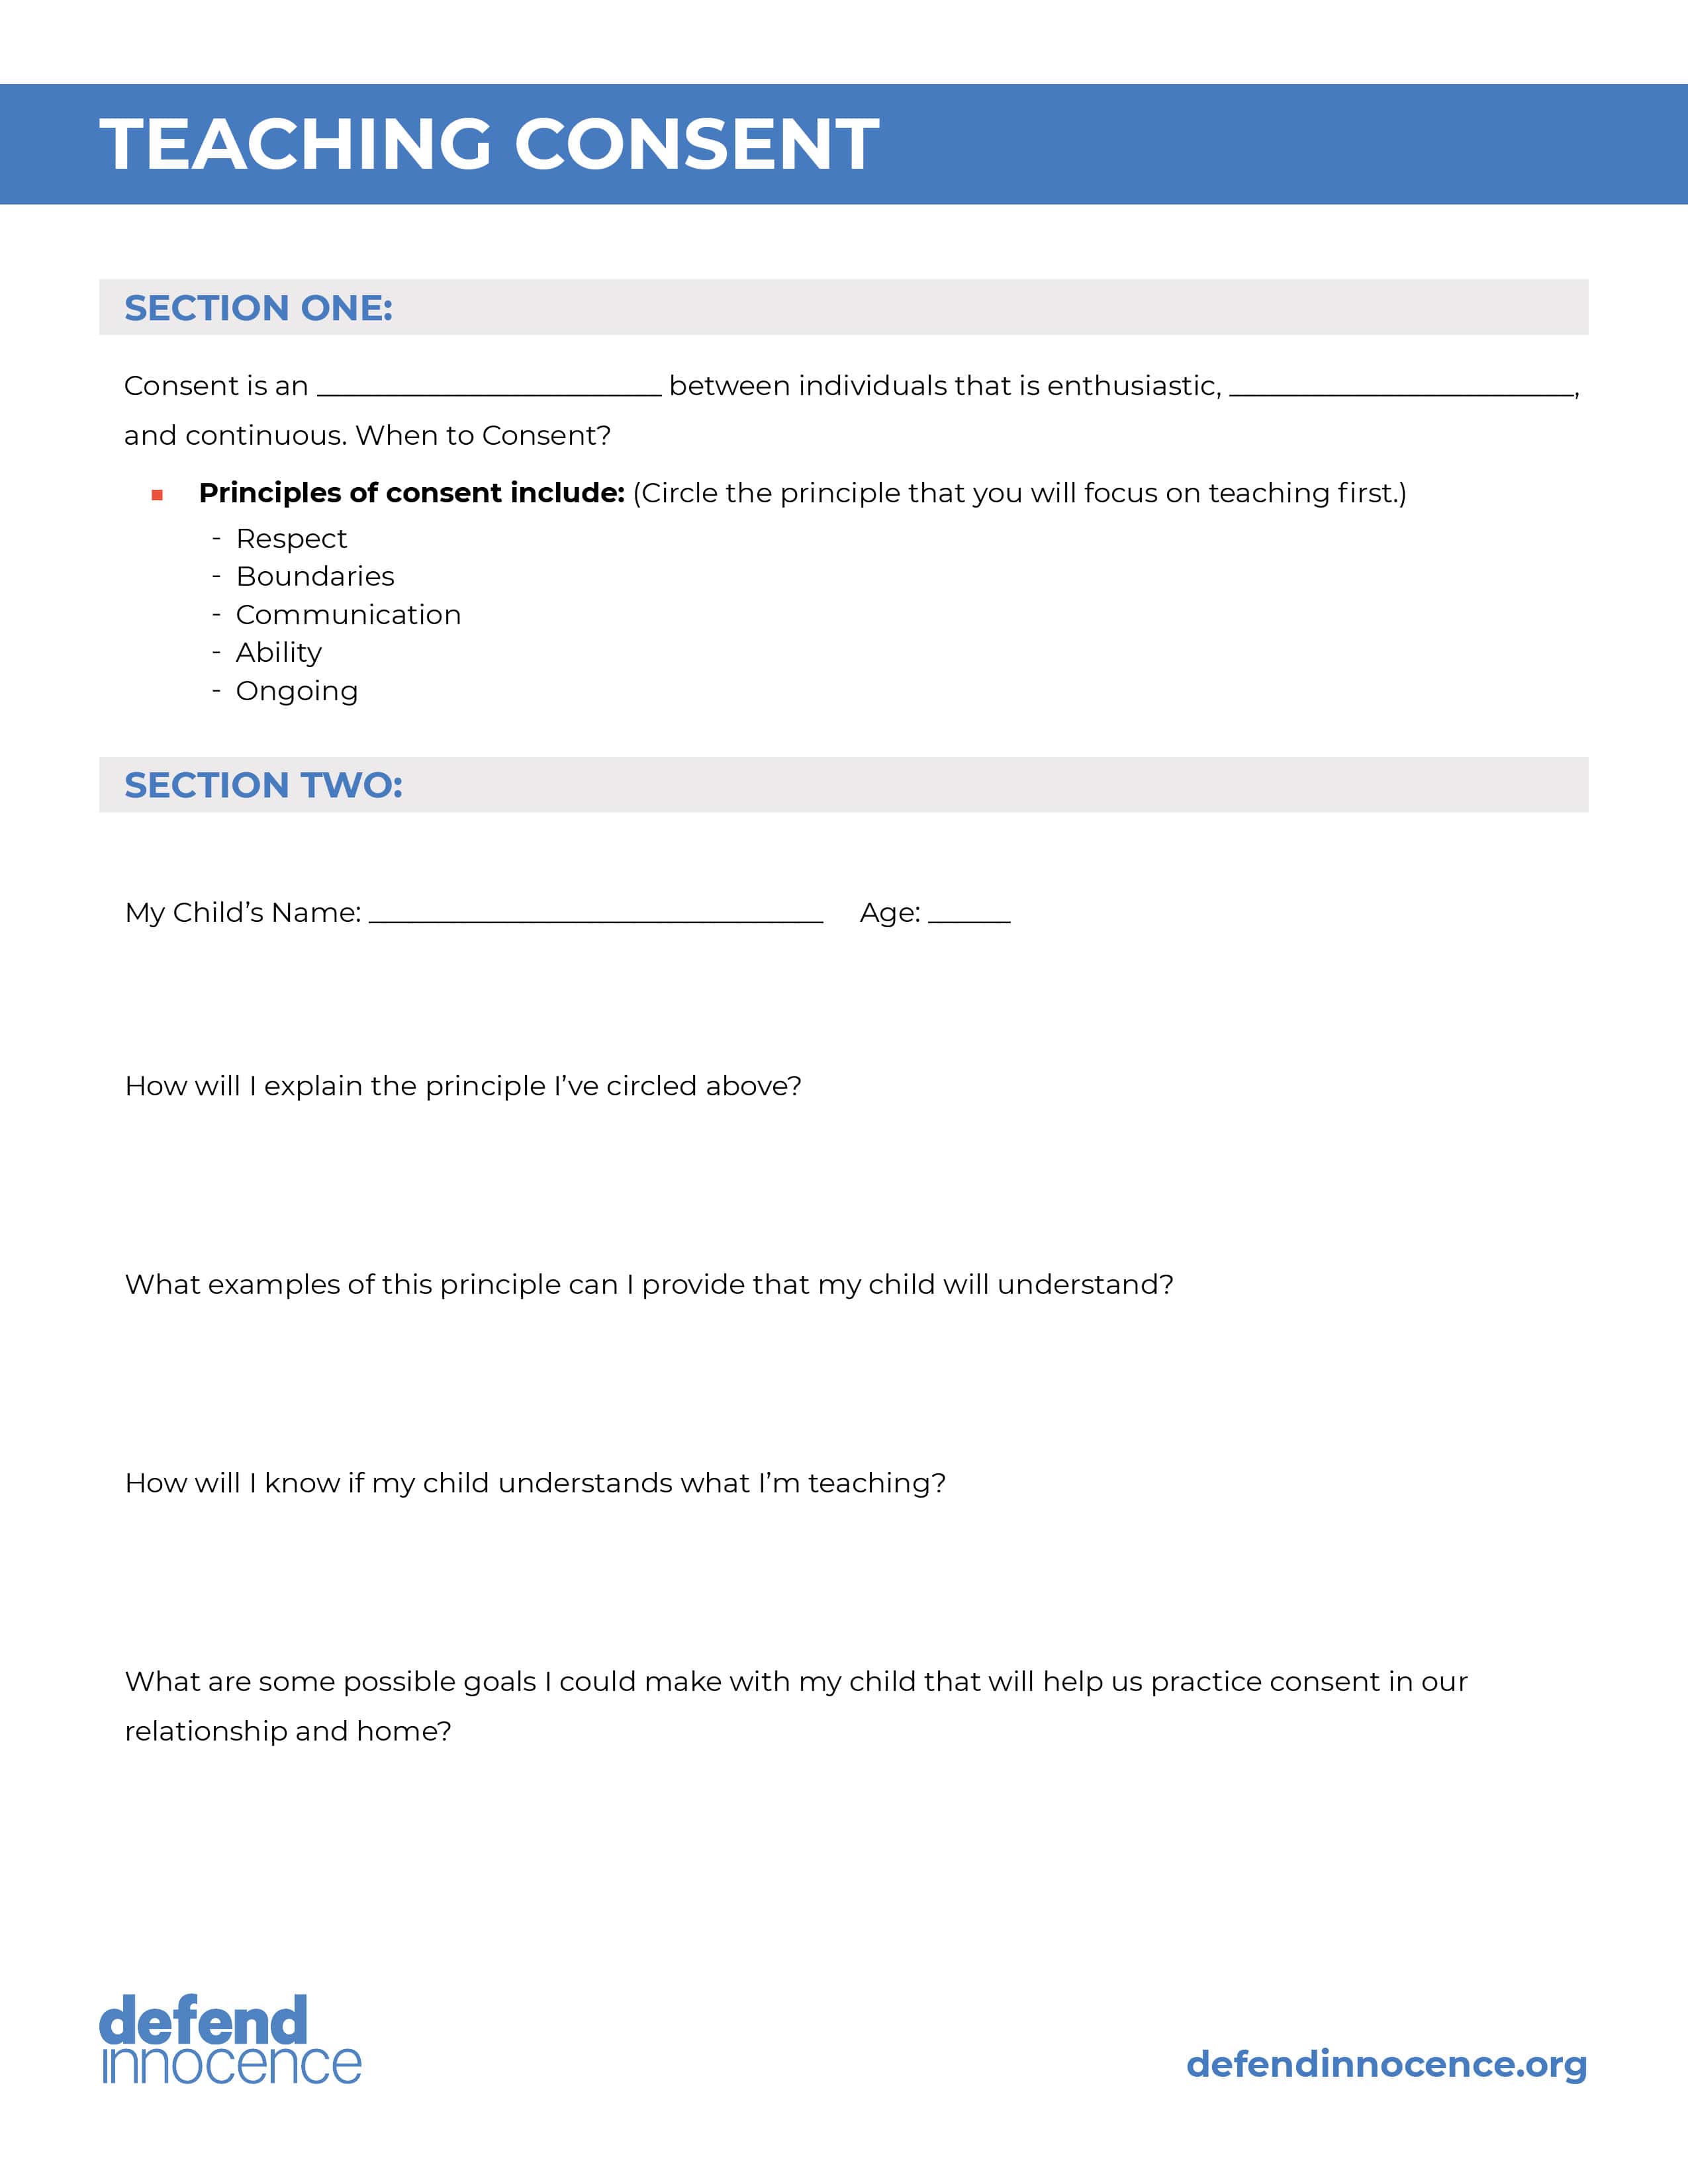 assignment worksheet 13.1 voluntary consent